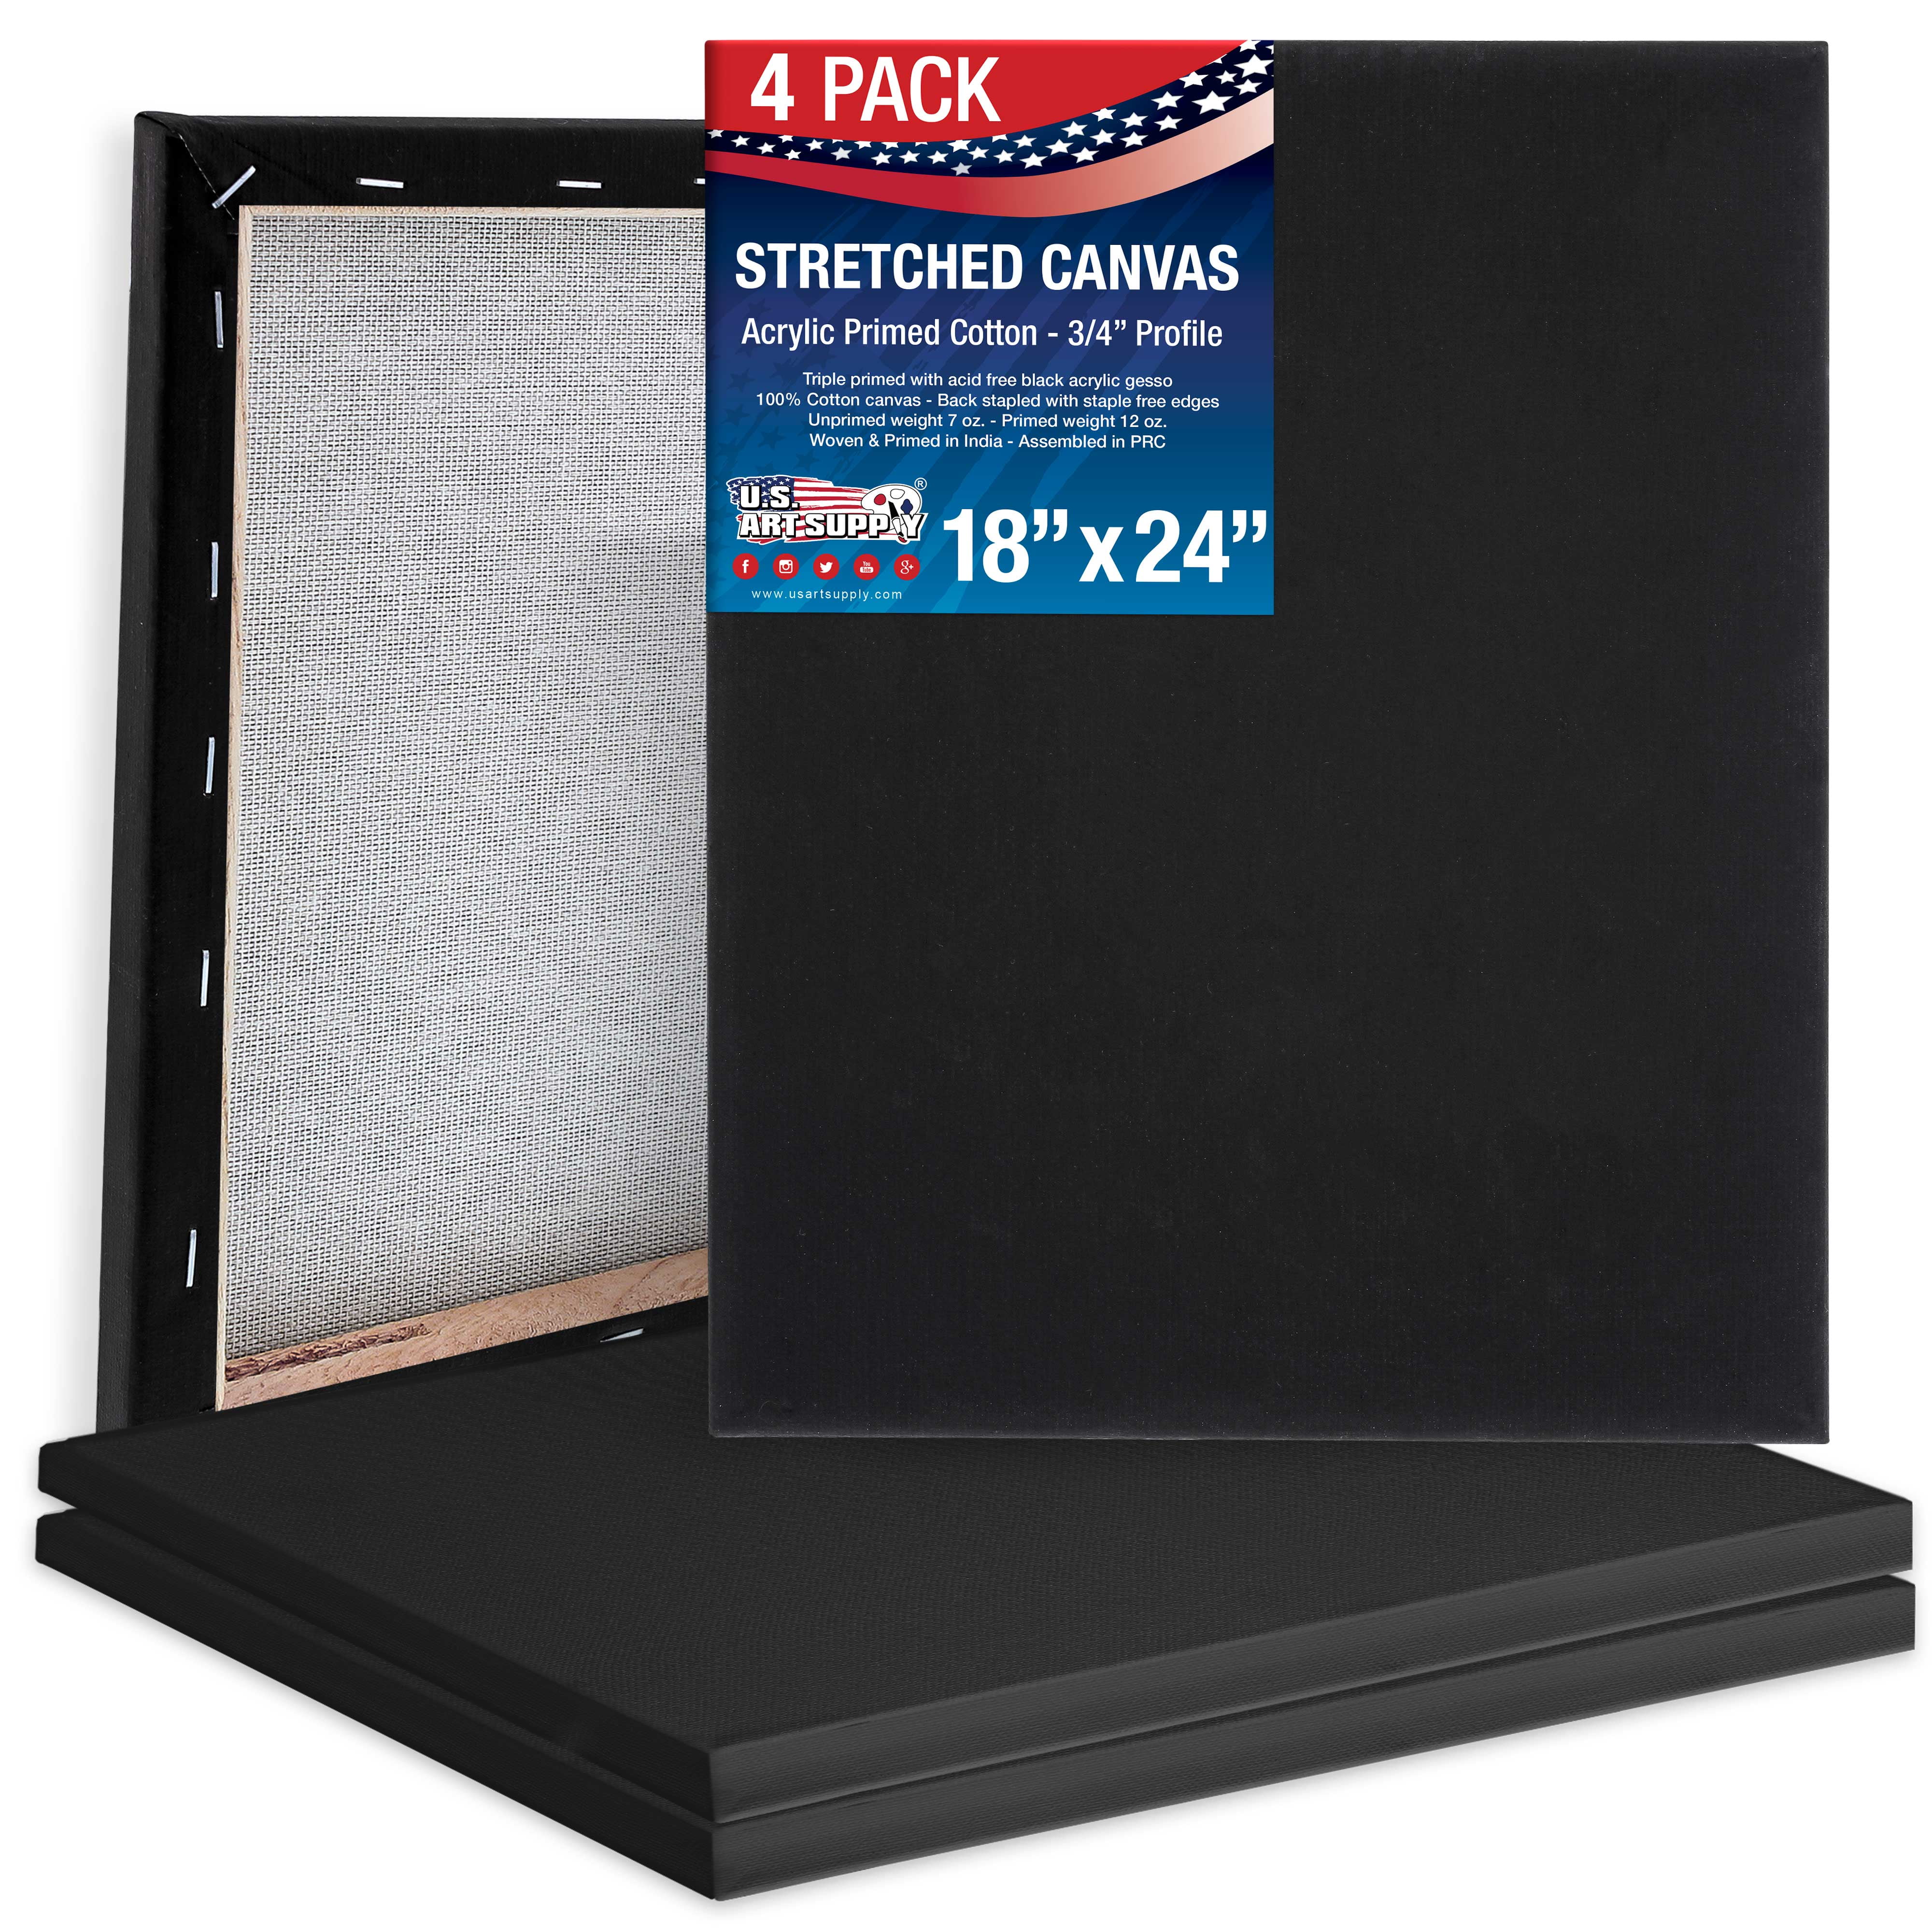 PHOENIX Black Stretched Canvas, 16x20 Inch/4 Pack - 3/4 Inch Profile, 8 Oz  Quadruple Gesso Primed 100% Cotton Blank Black Canvases for Acrylic, Oil